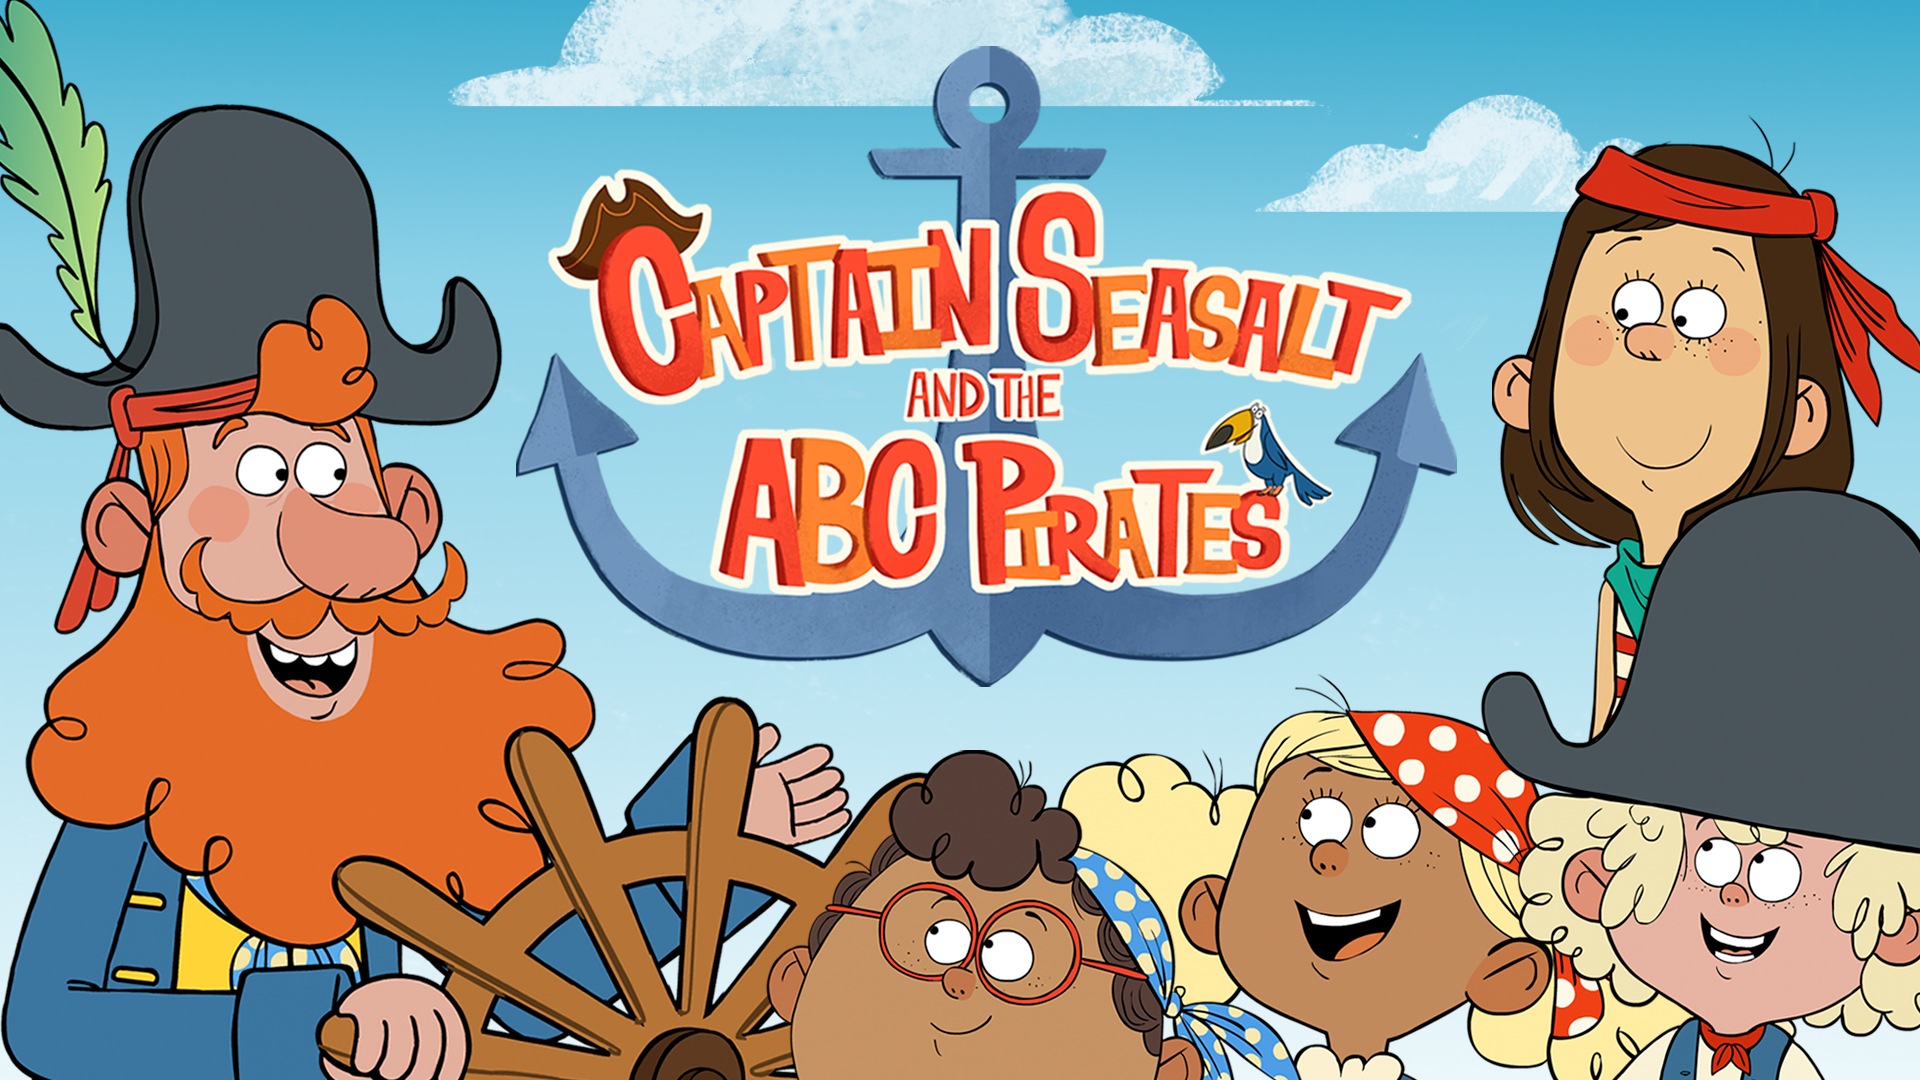 Captain Seasalt and the ABC Pirates